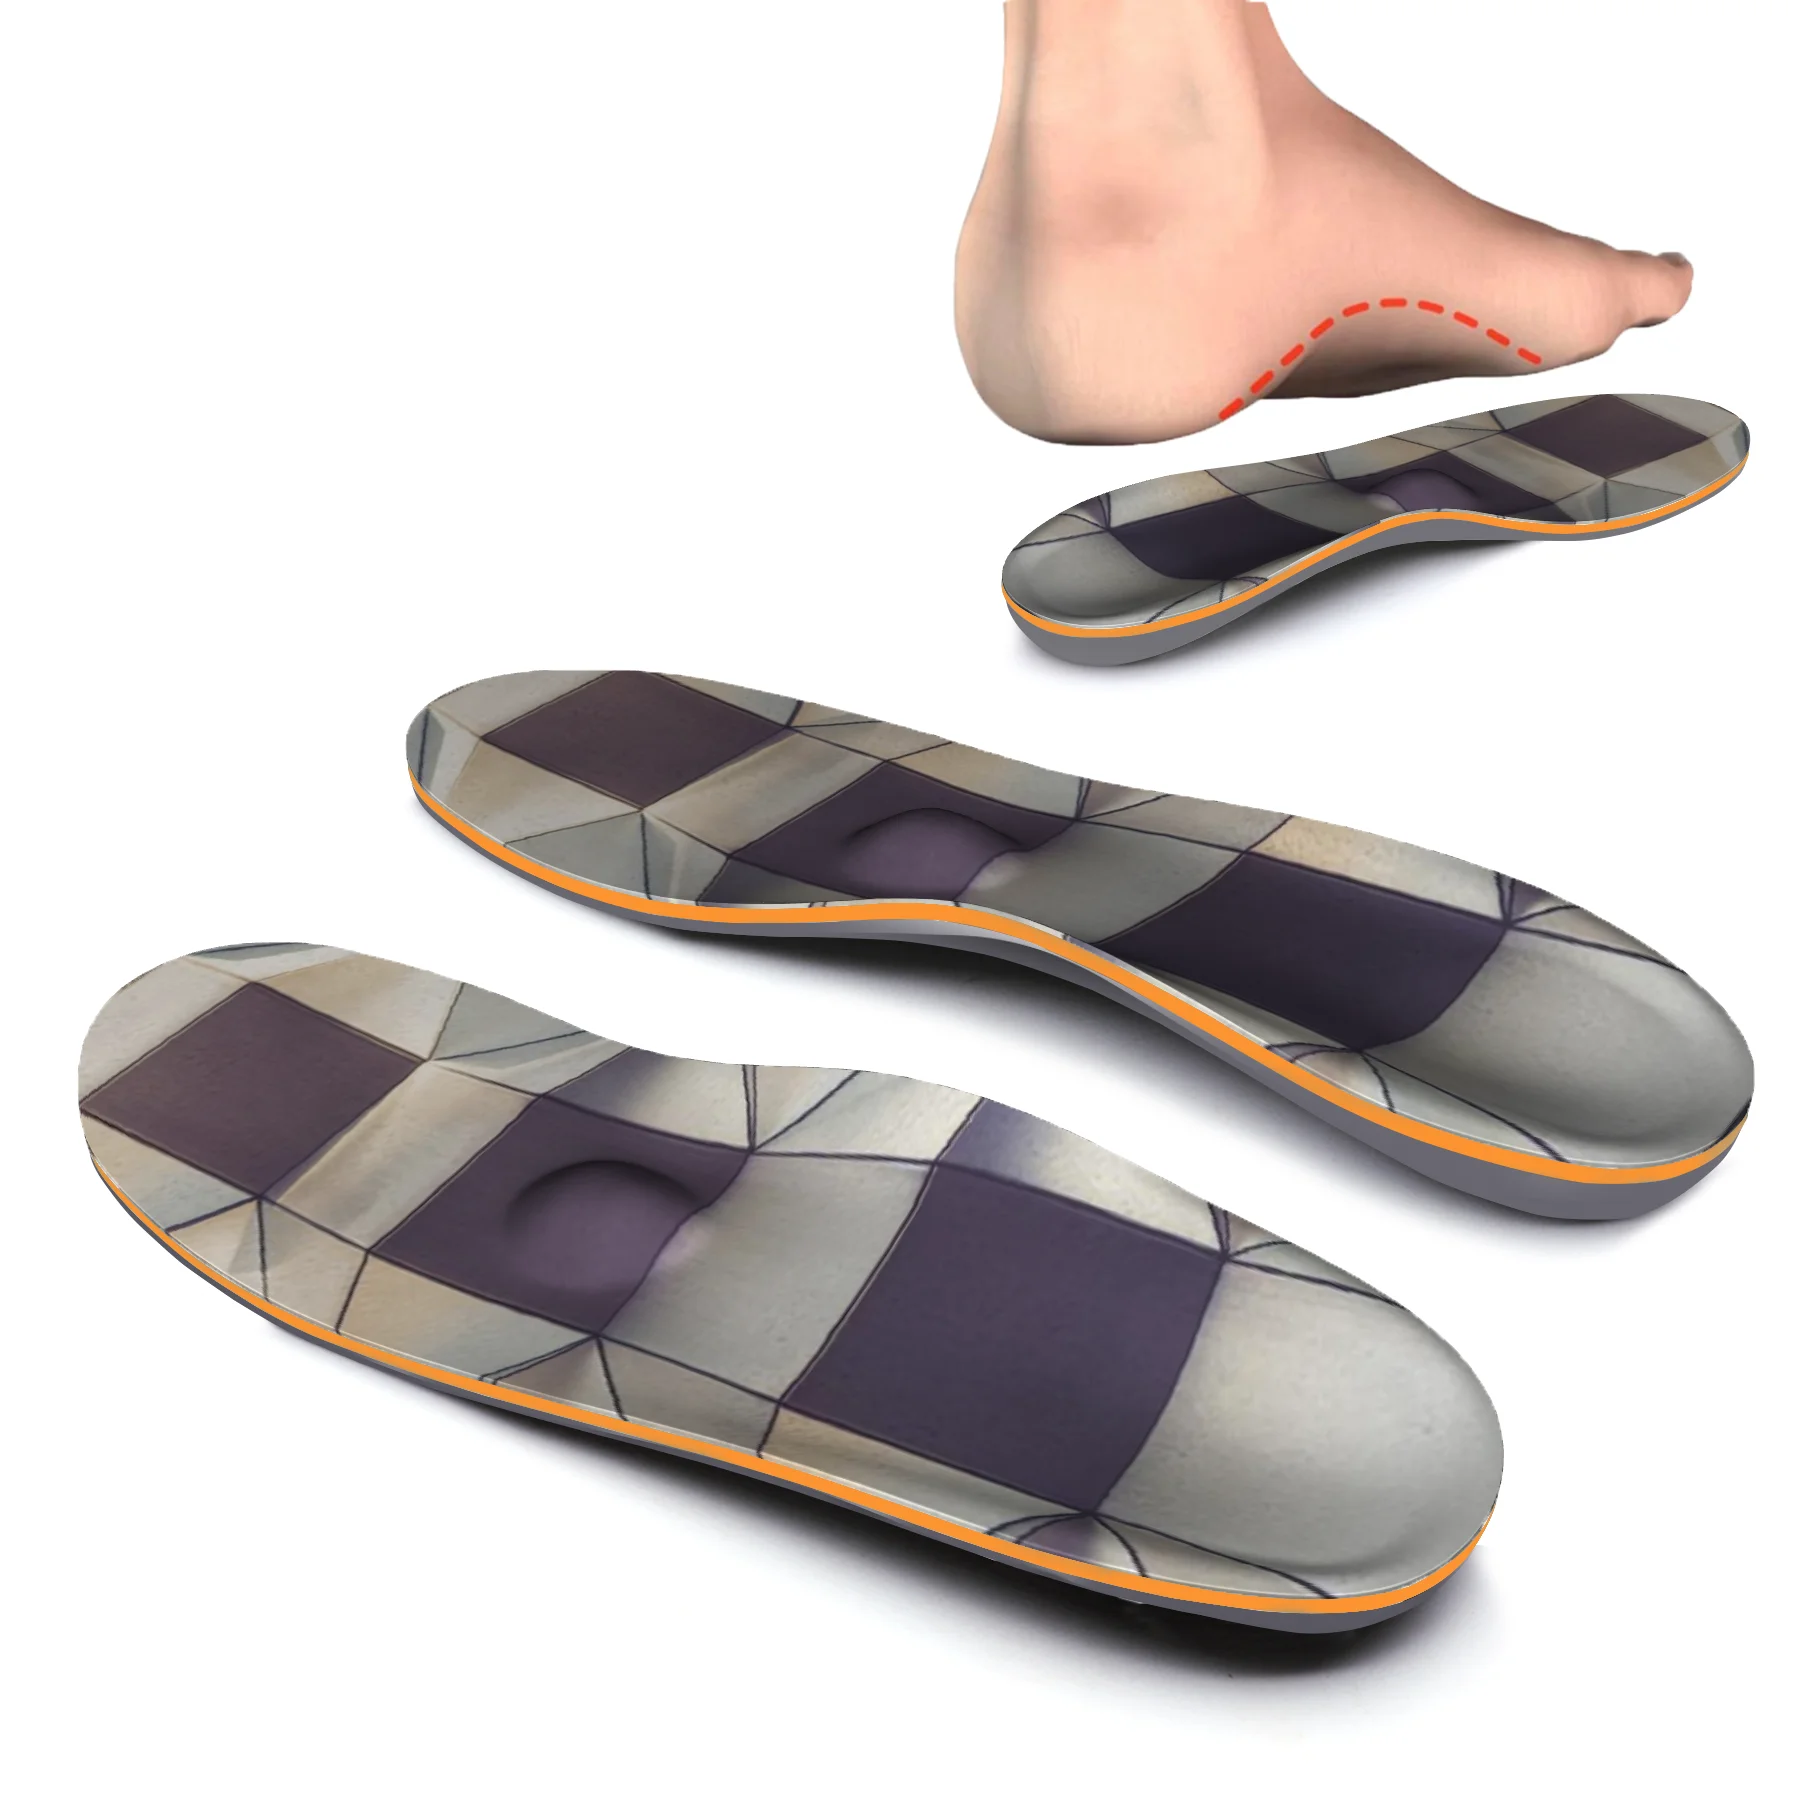 EVA Material Suitable For Work Shoes,High Arch Support Insoles Memory Foam For Long Standing